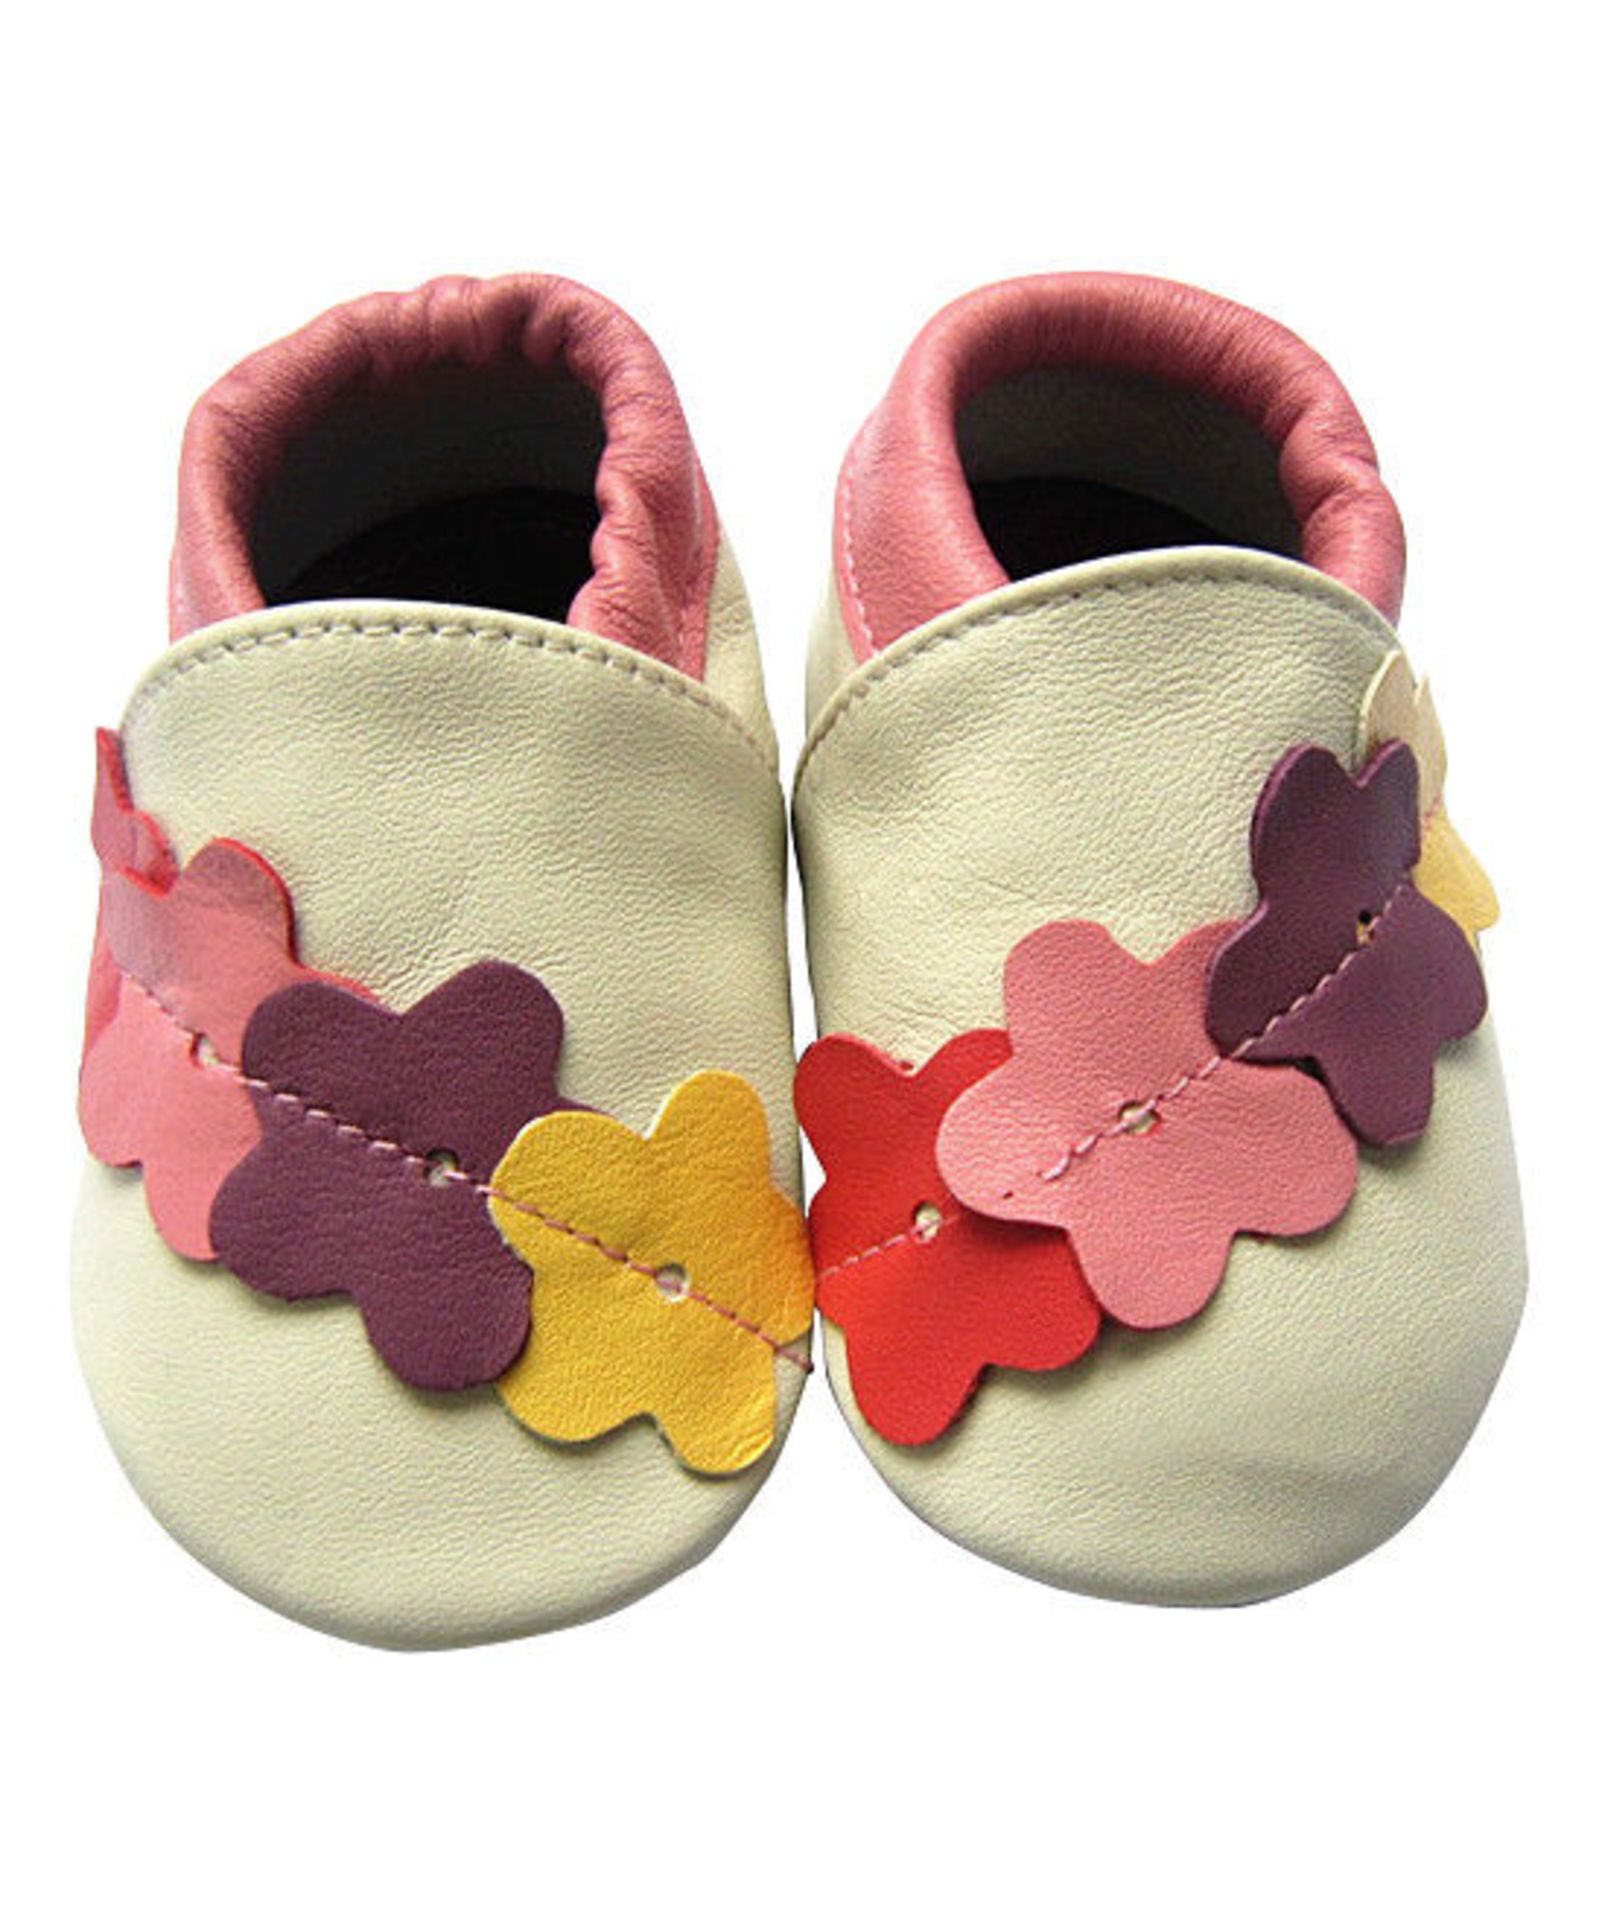 Forgotten Princess Cream Flower Leather Booties 12-18 Months (New Without Box) [Ref: 31174380-M-